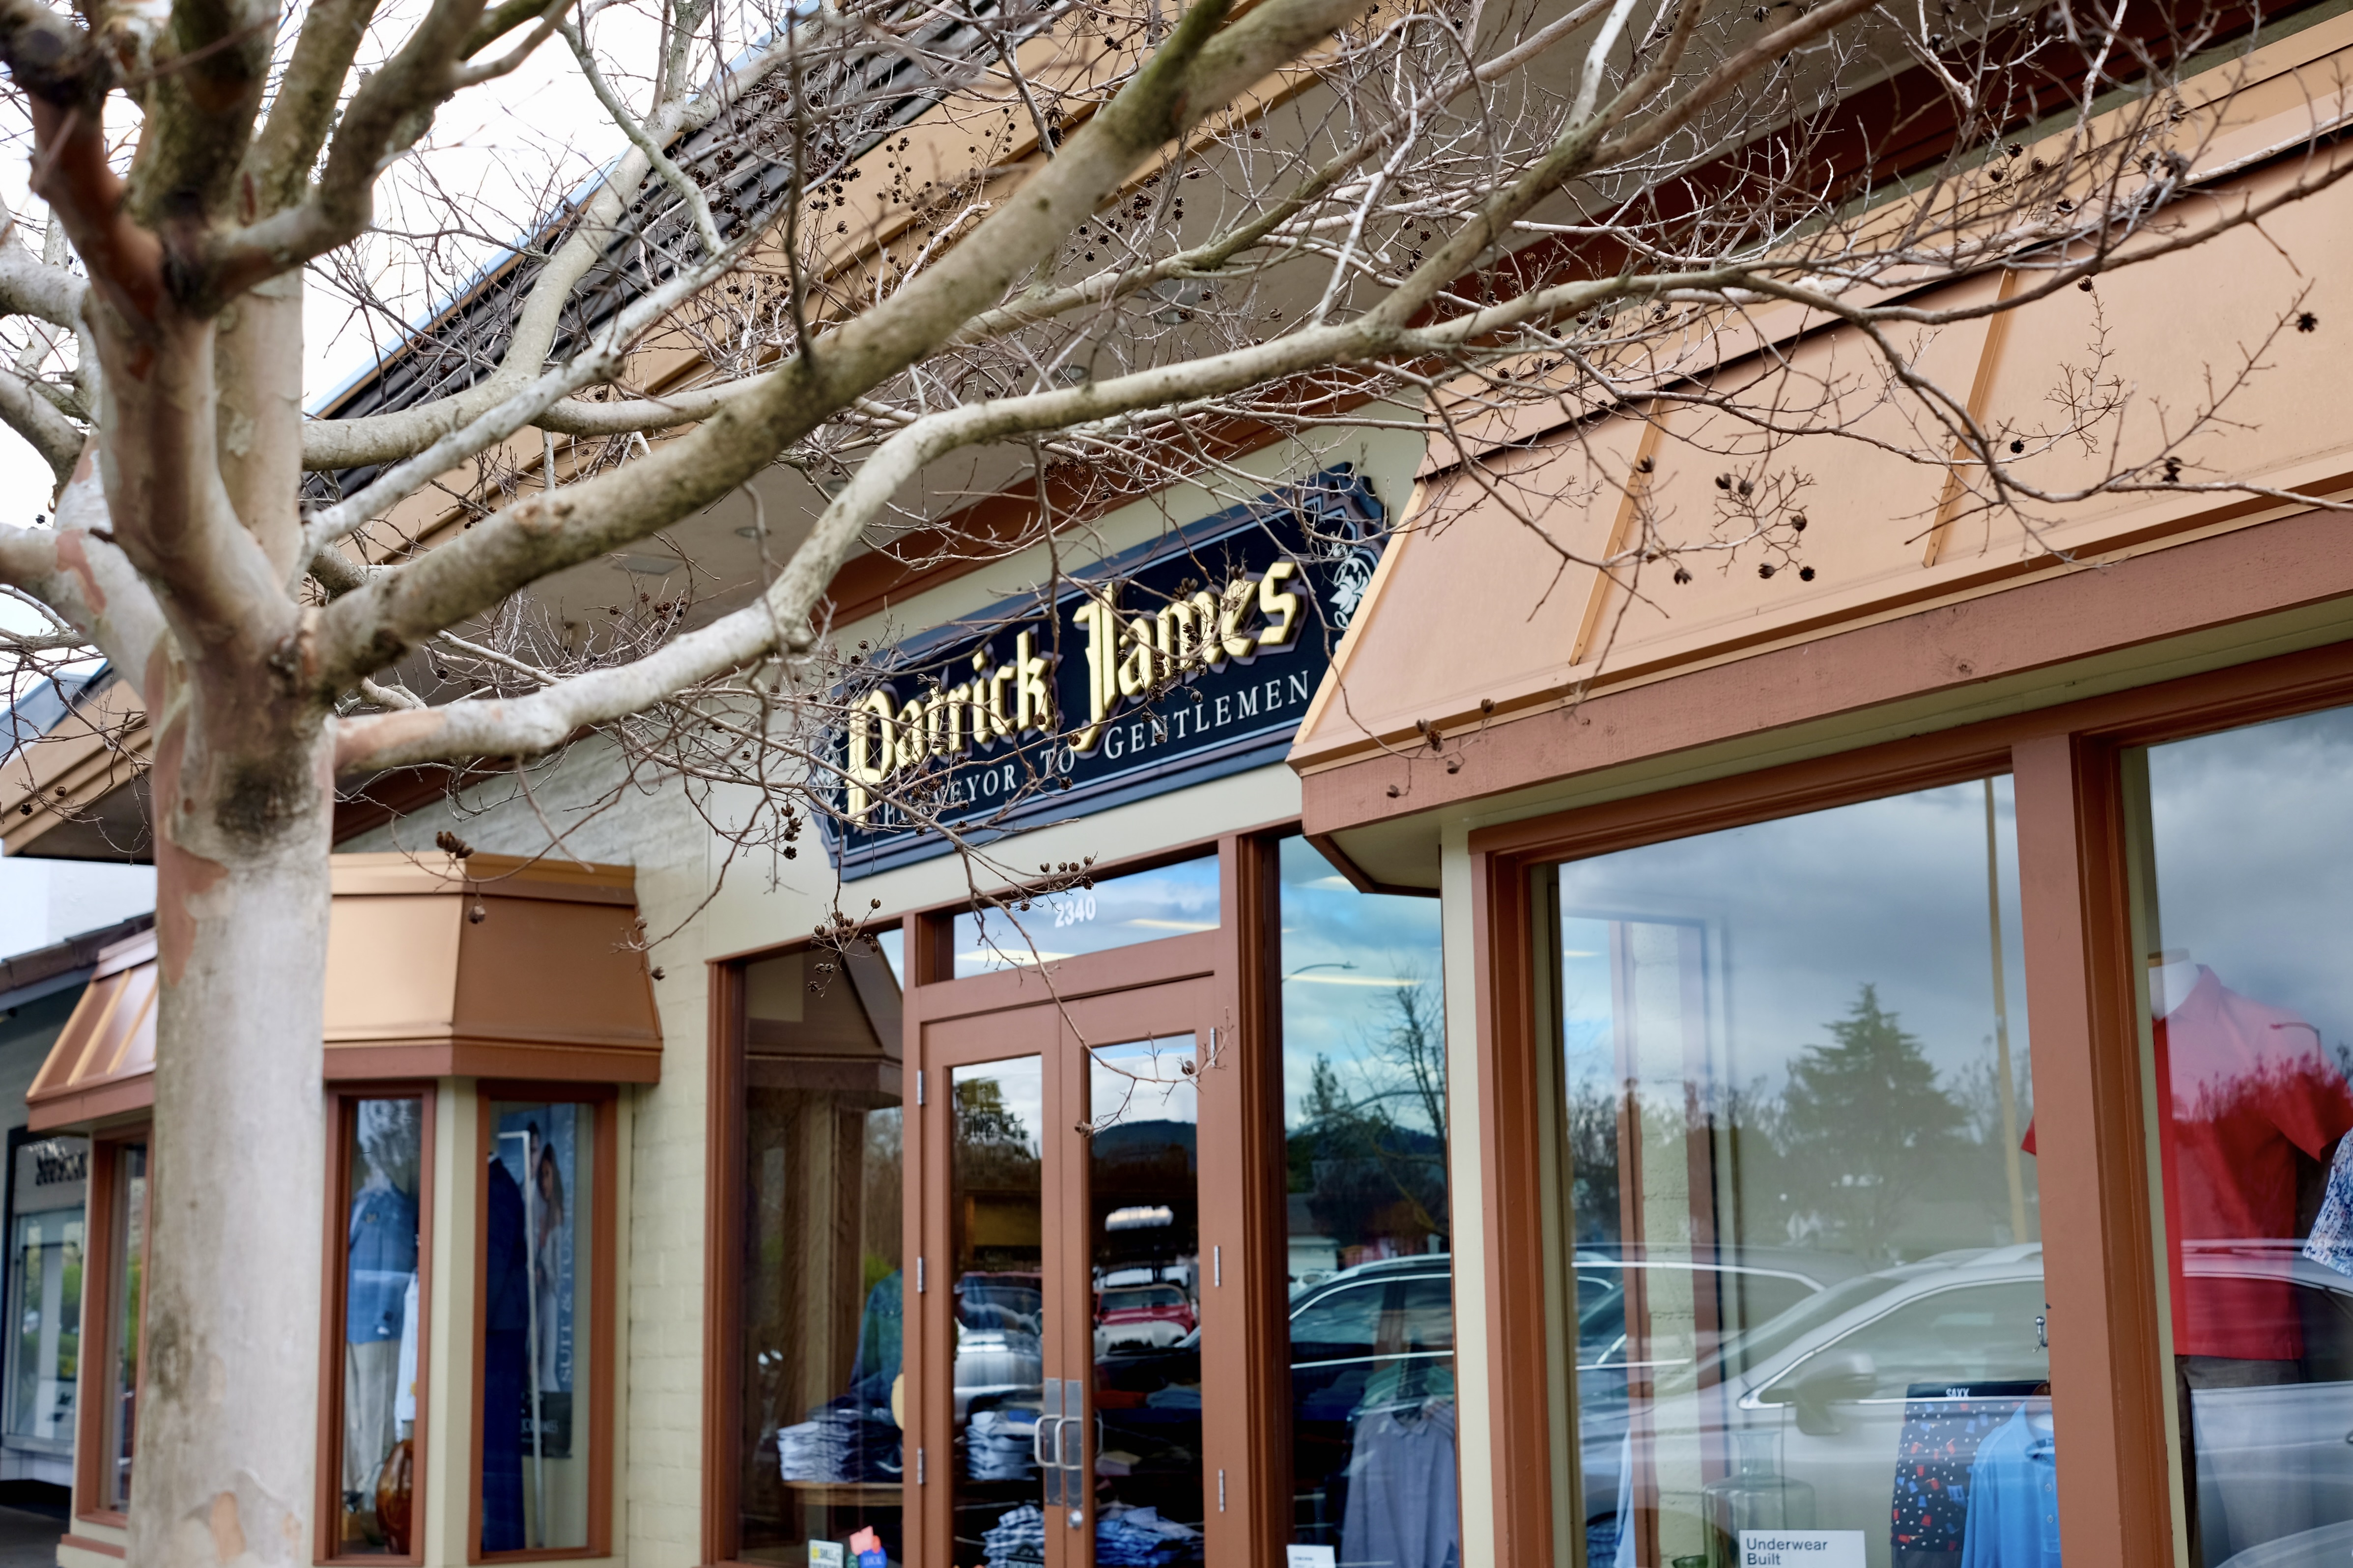 A tree grows in front of a store called Patrick James, "purveyor to gentlemen."